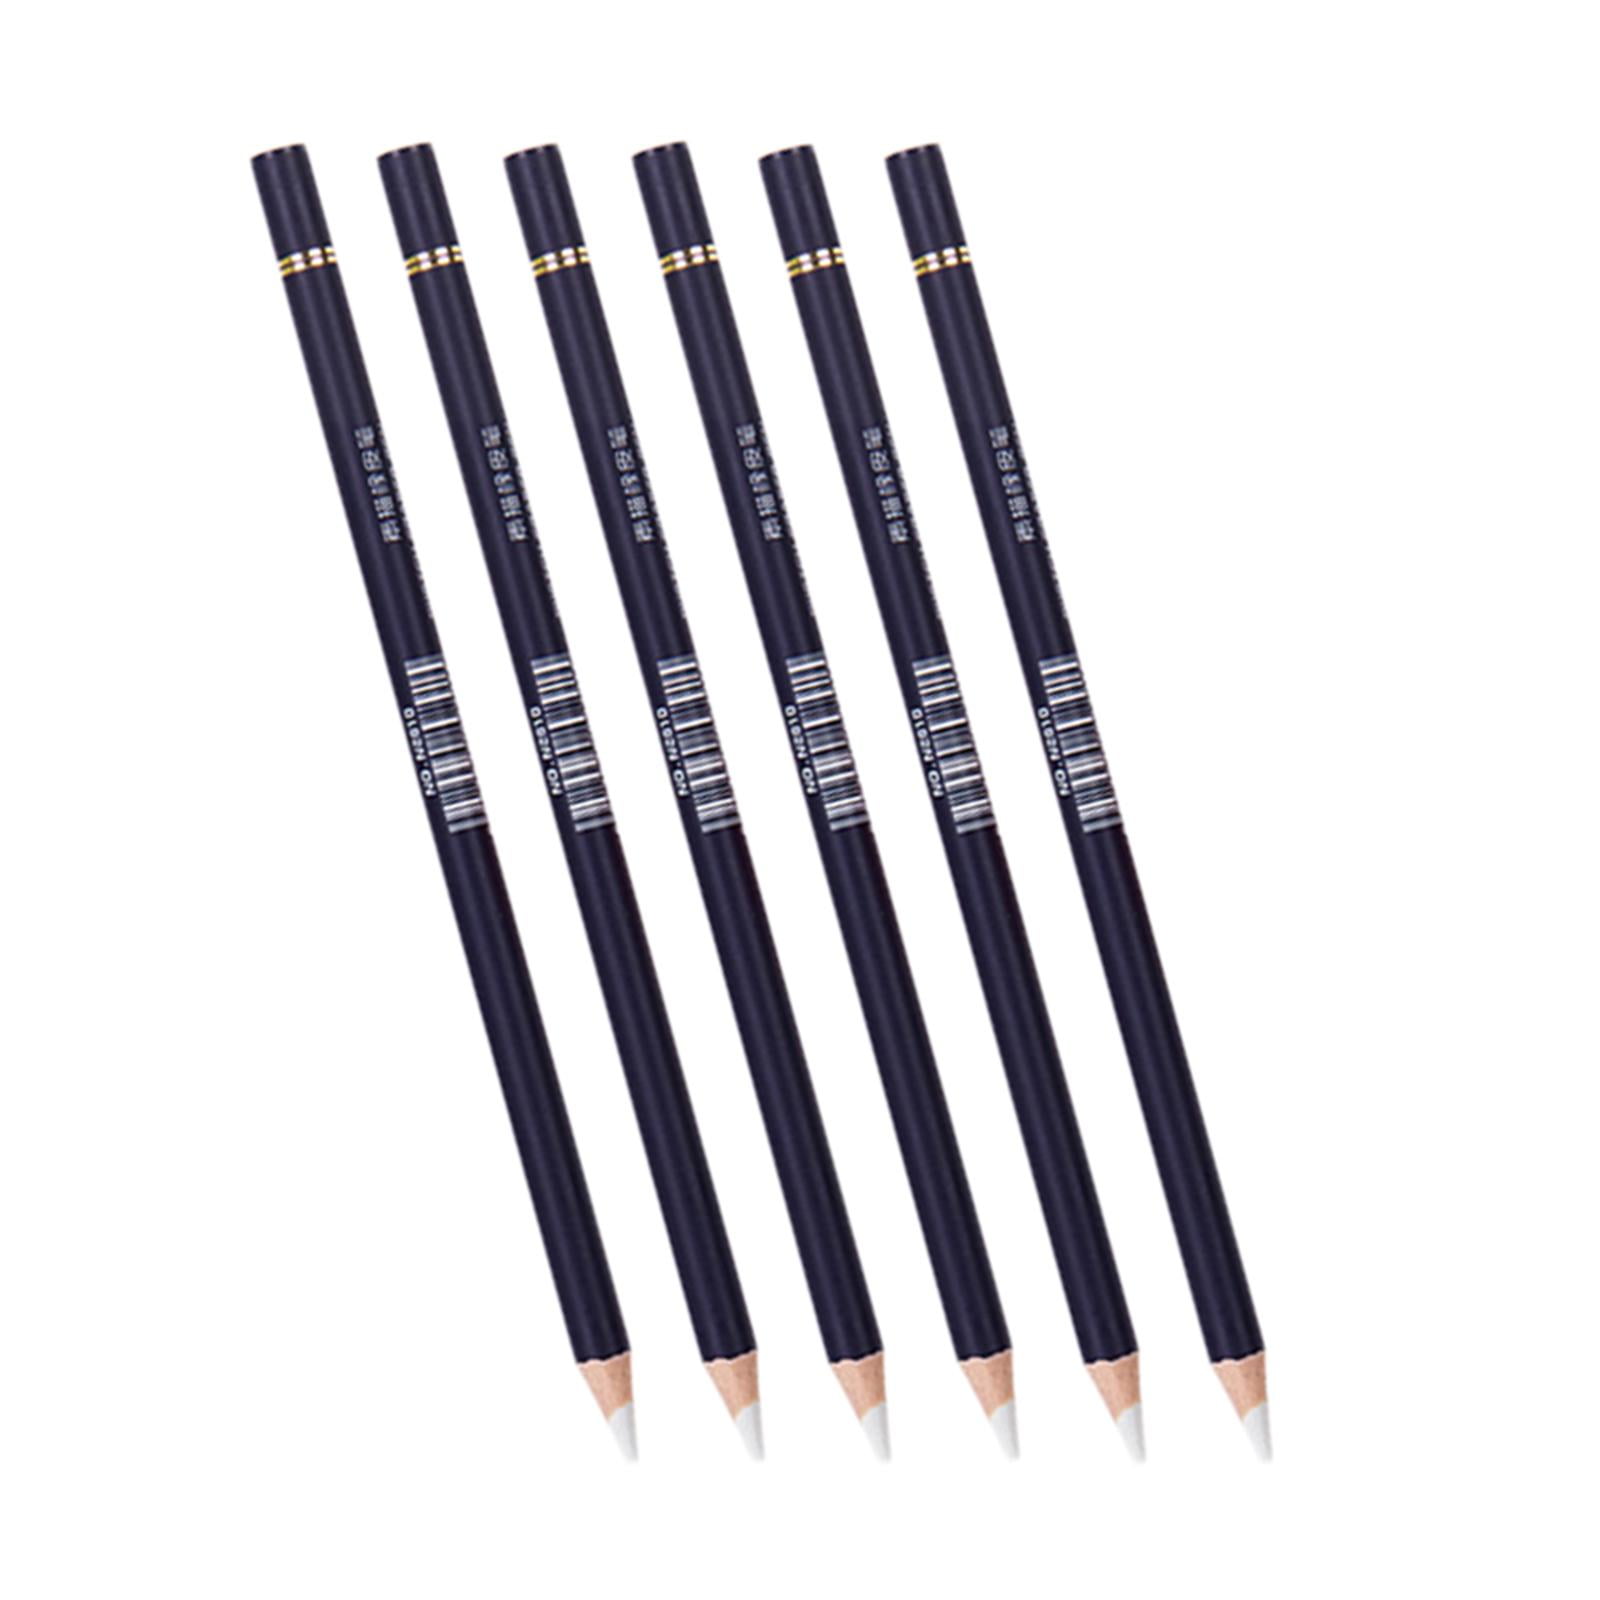 6 Pieces Pen-Style Erasers Artists Sketching Eraser Pencils Revise Details  for Arts Drawing ing | Walmart Canada